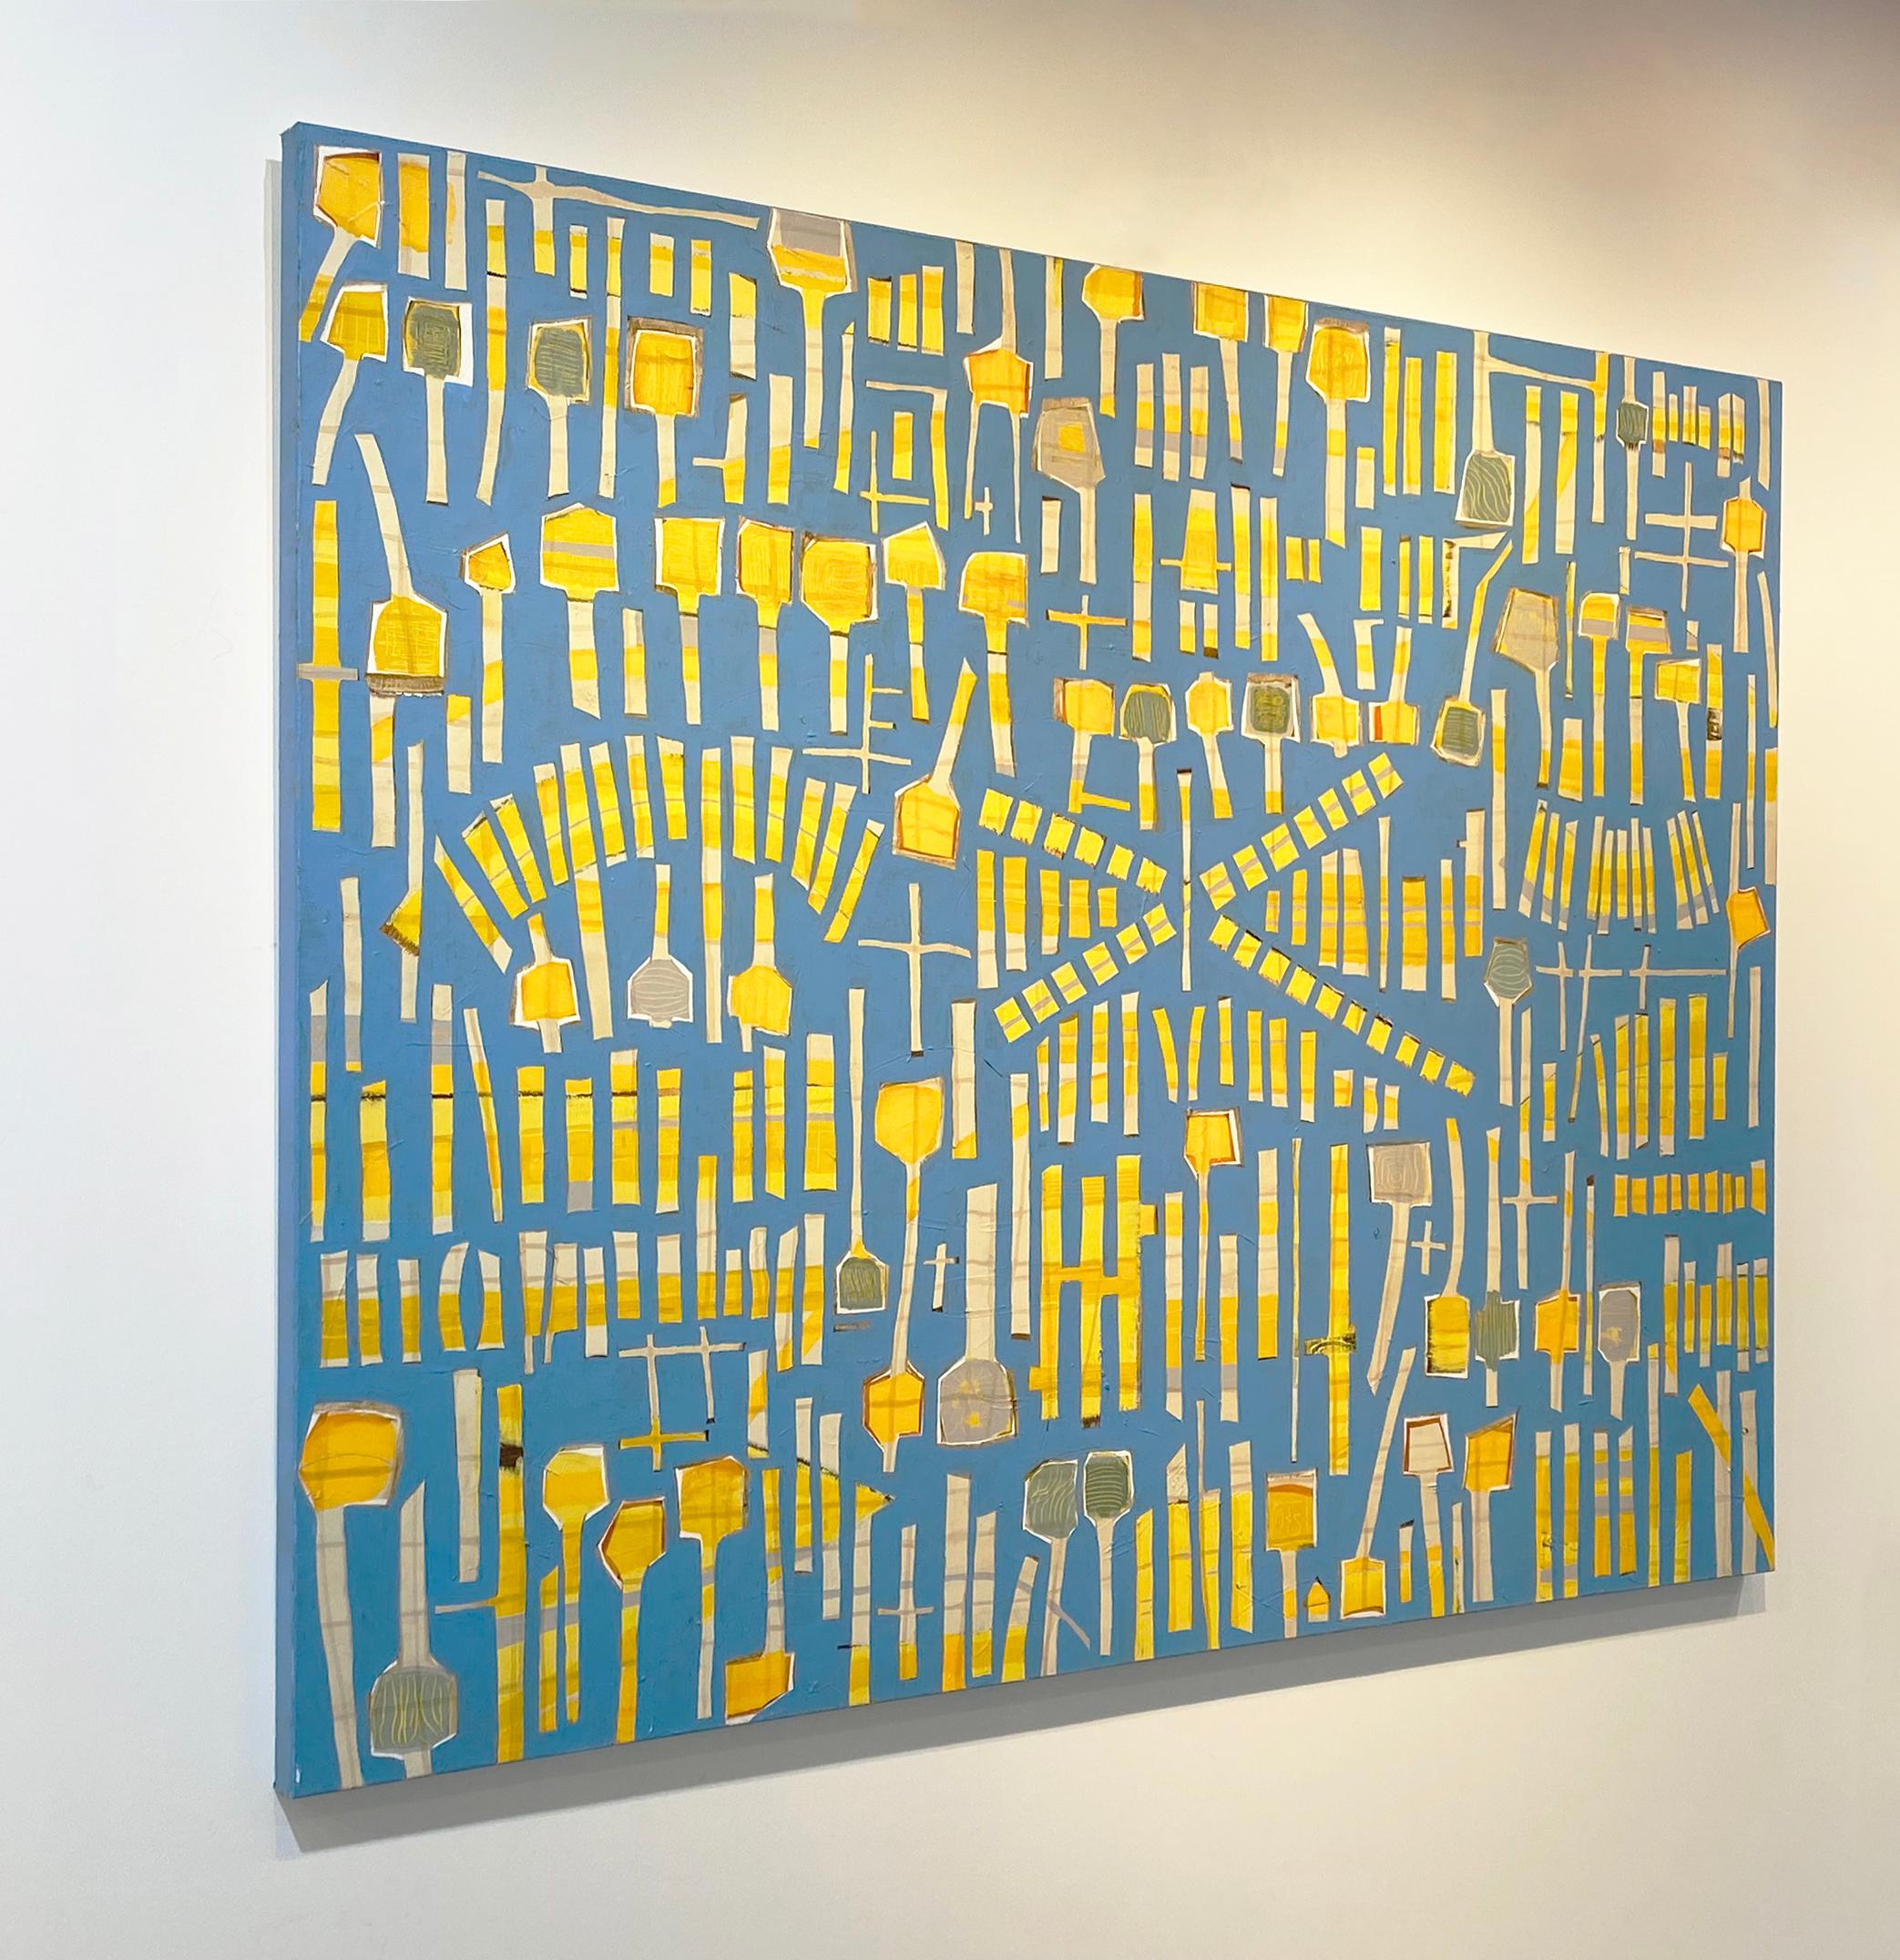 This large-scale abstract painting features a bright blue background with vibrant, complementary yellow shapes covering the canvas. The shapes are mostly rectangular, with some larger ones including a square-like shape at the top, making them look